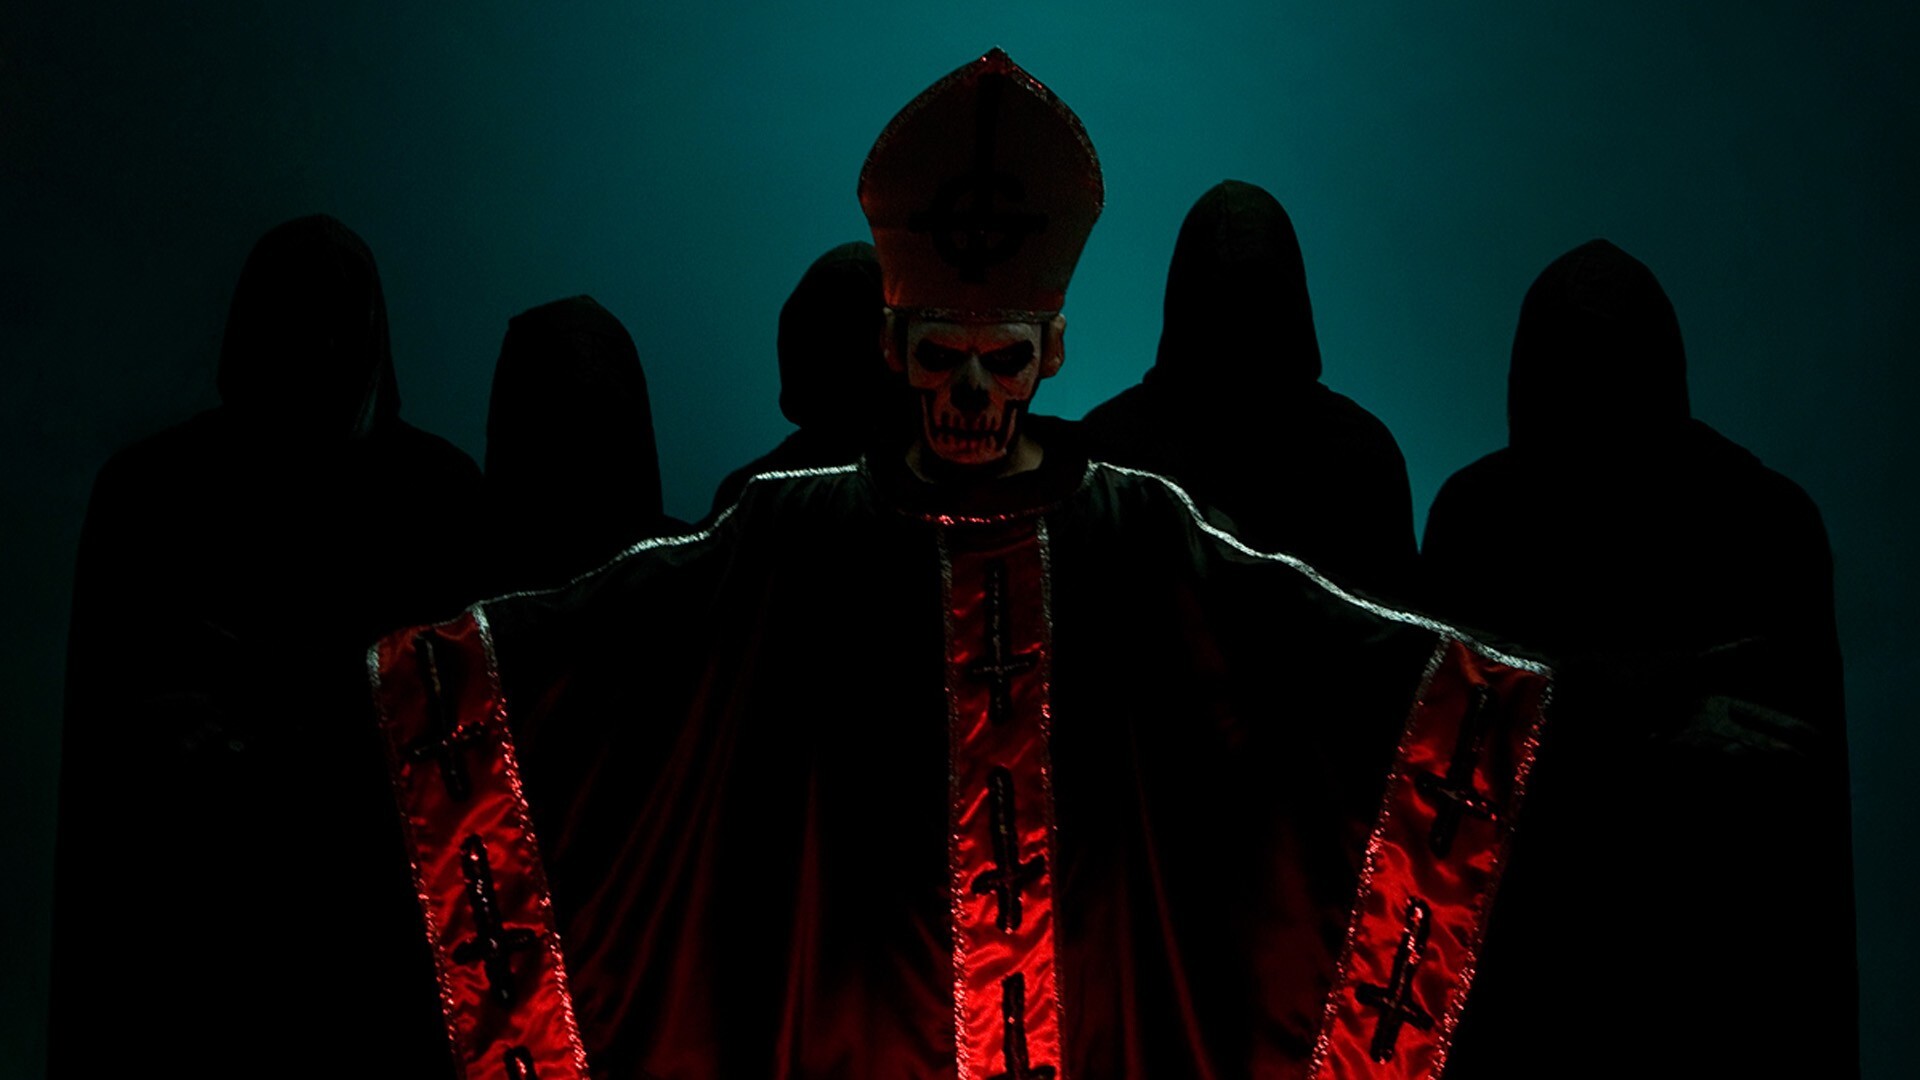 Ghost (Band): A member of the Group of Nameless Ghouls, A Ghoul Writer, Cardinal Copia. 1920x1080 Full HD Wallpaper.